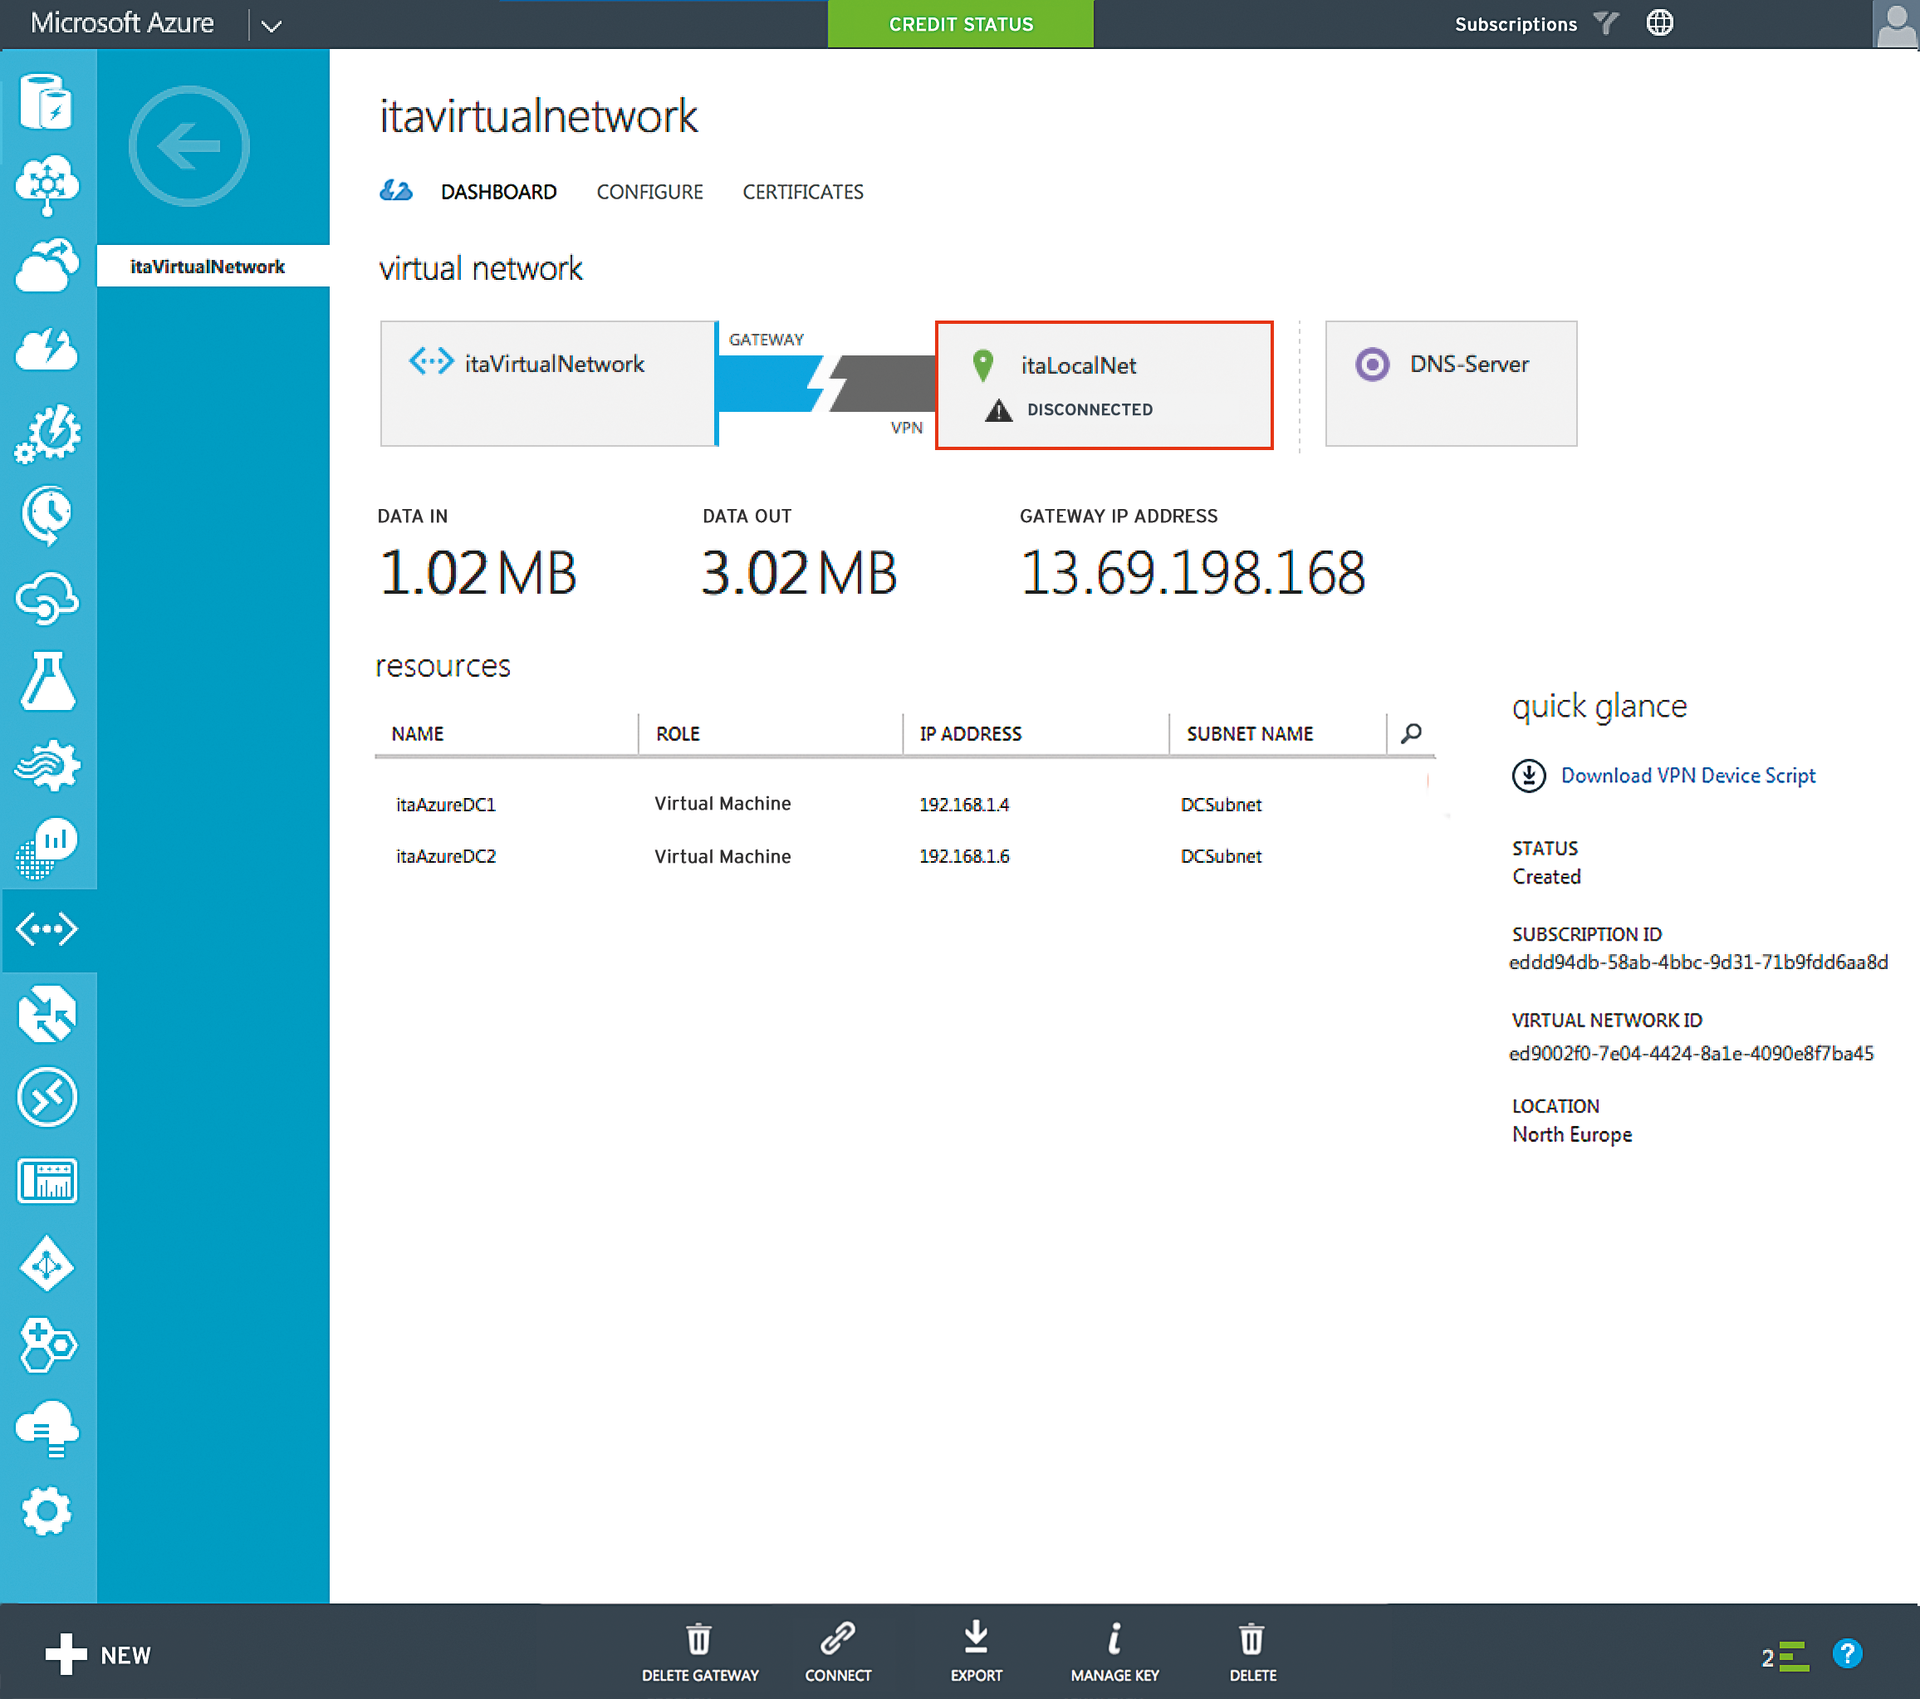 In the case of an interruption to the VPN connection, Azure automatically tests whether it can be recovered. 